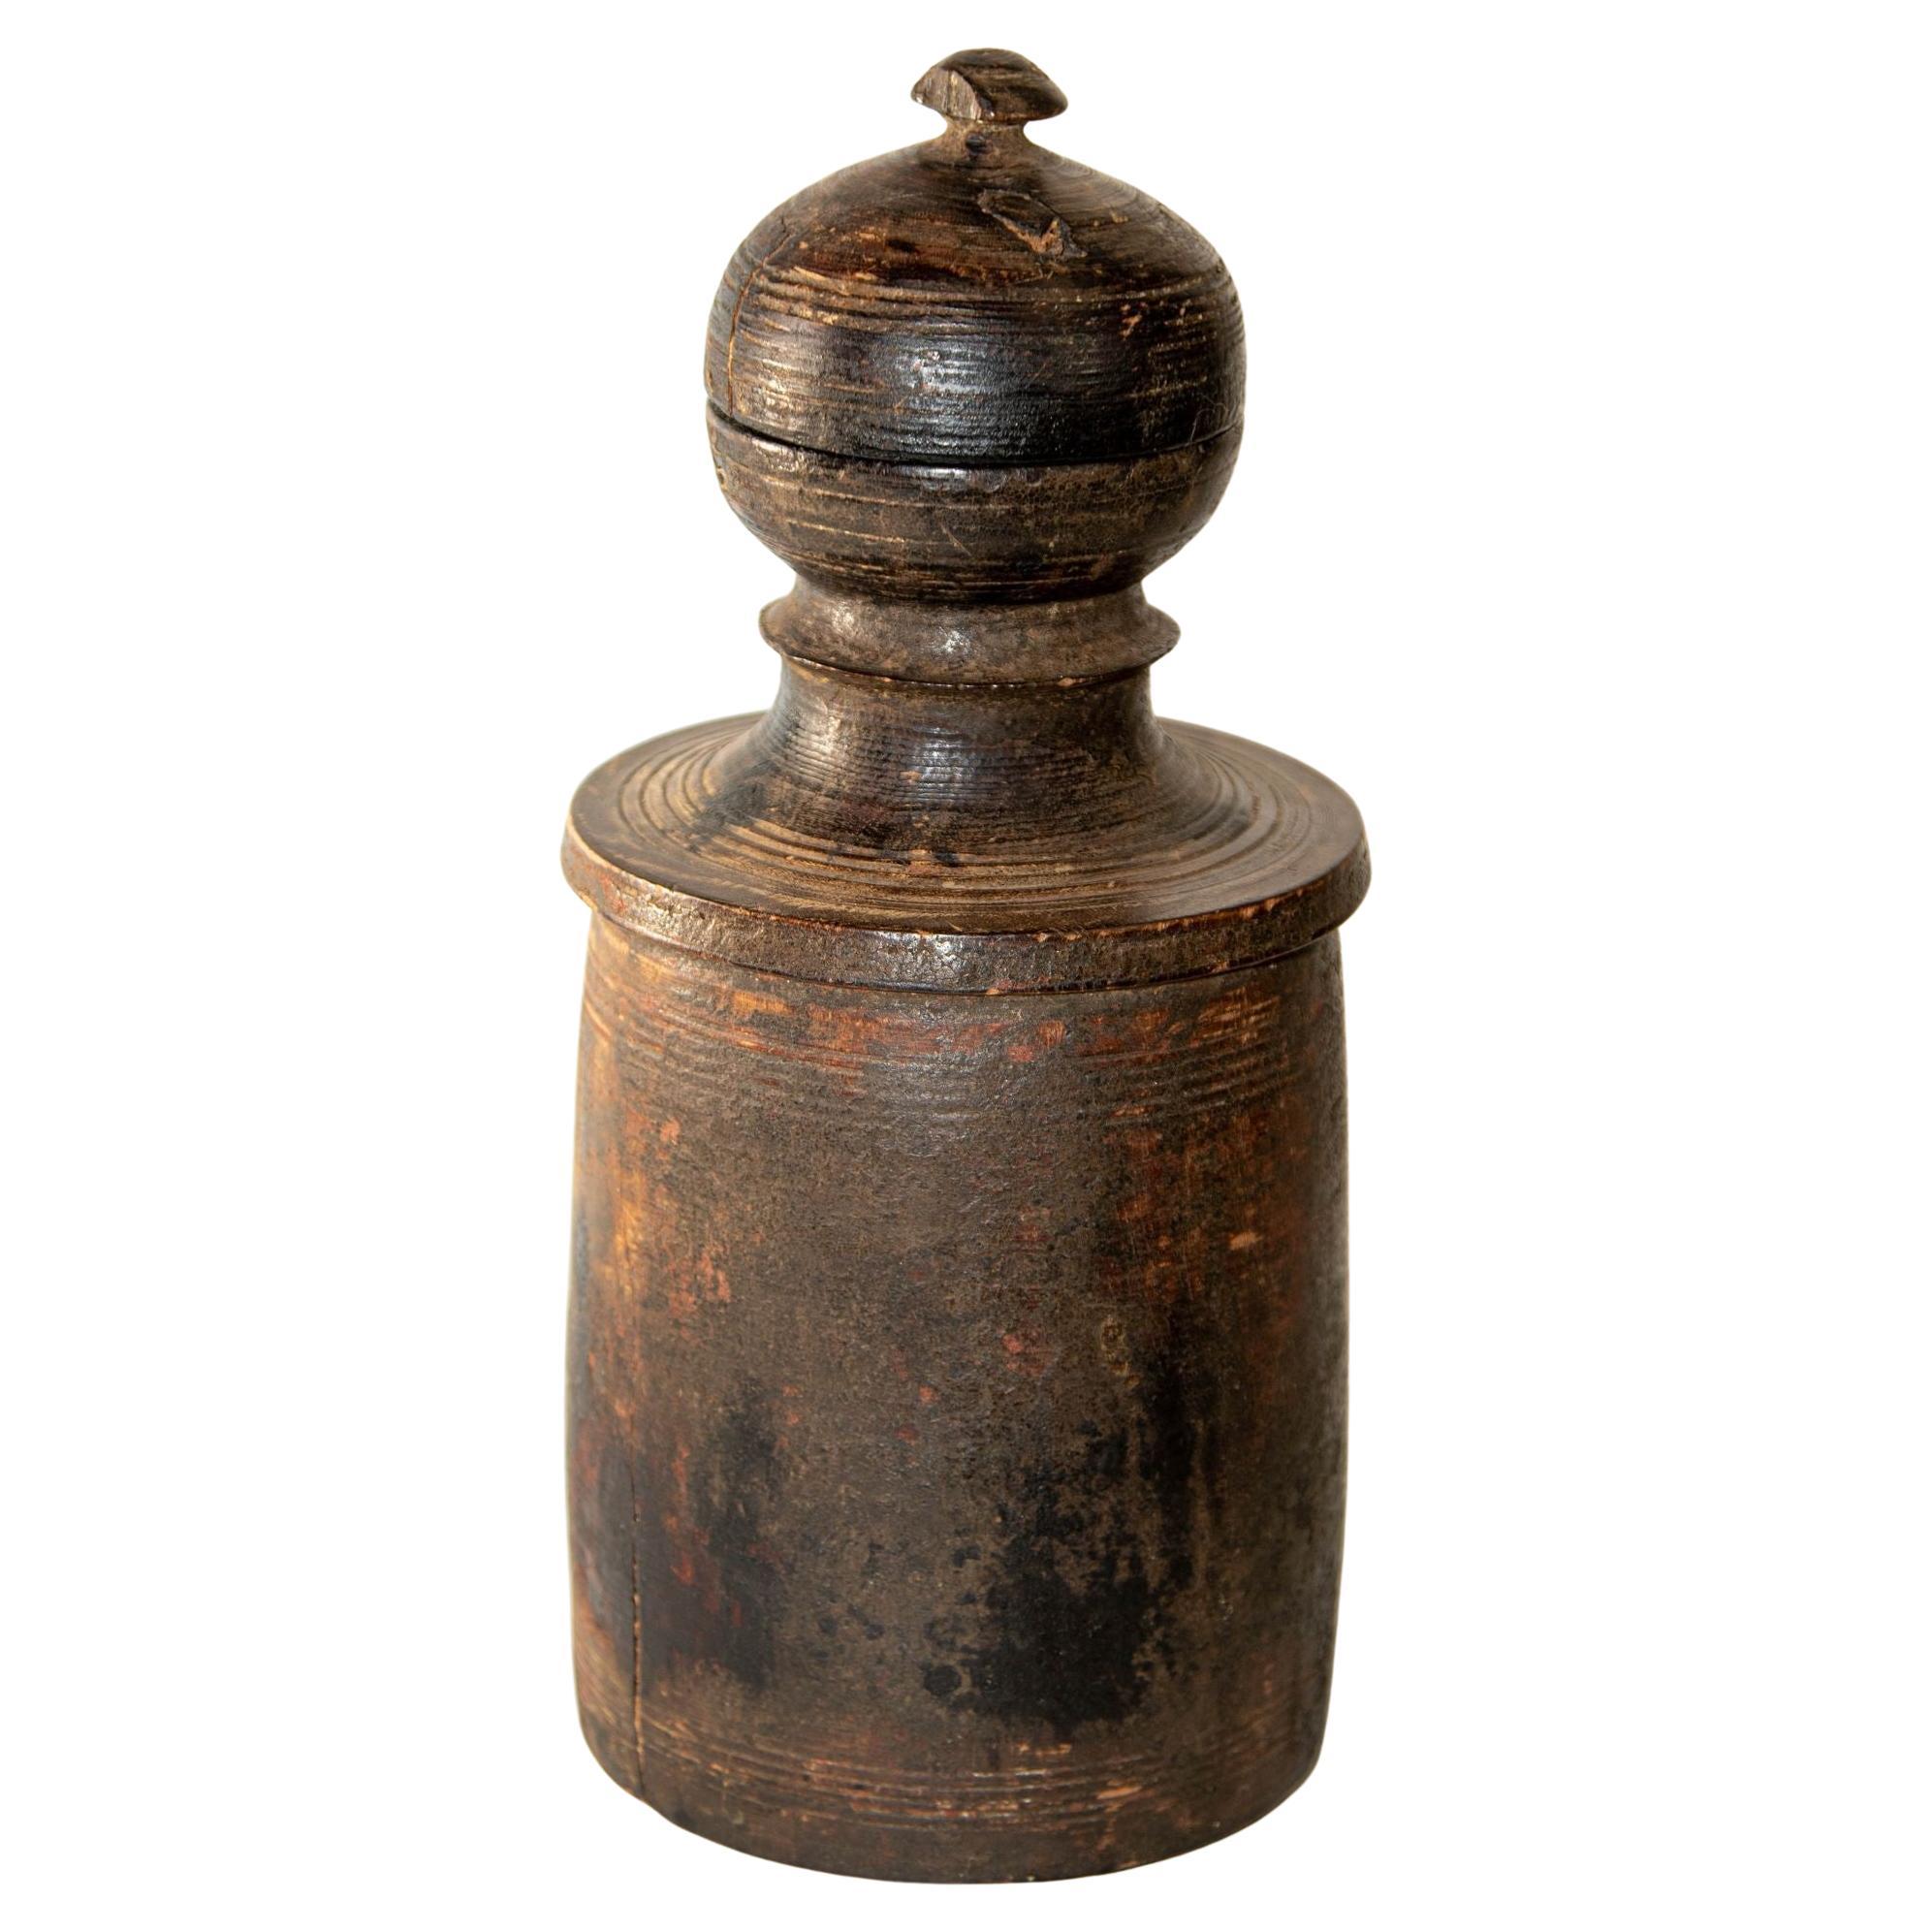 Antique Wooden Pot or Tekhi from Nepal, 1900s